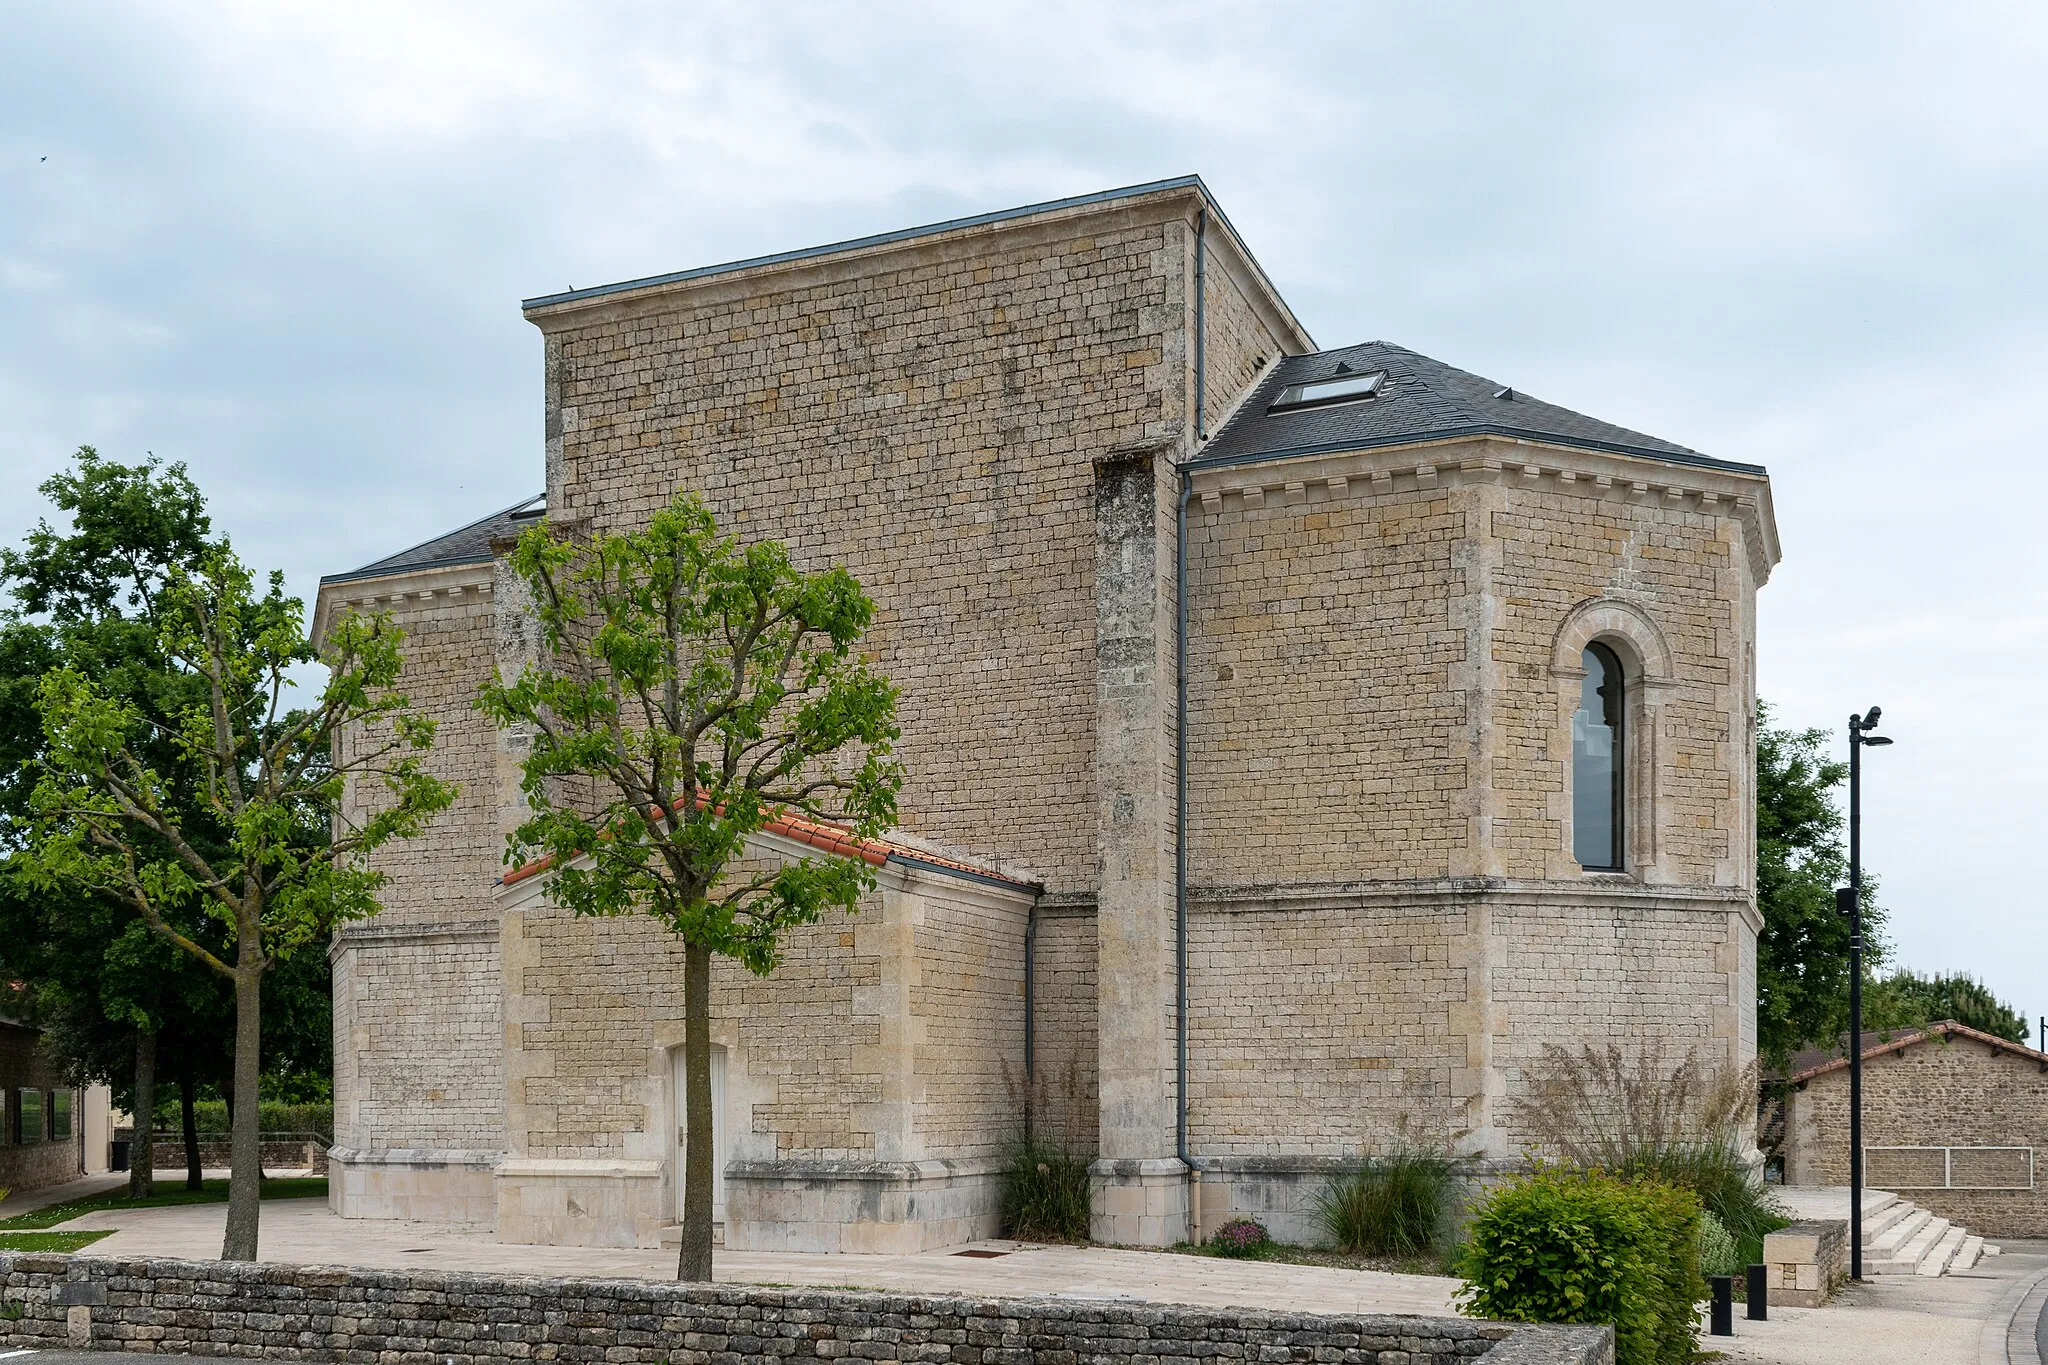 Photo showing: Rear view of the Protestant Temple in Chauray